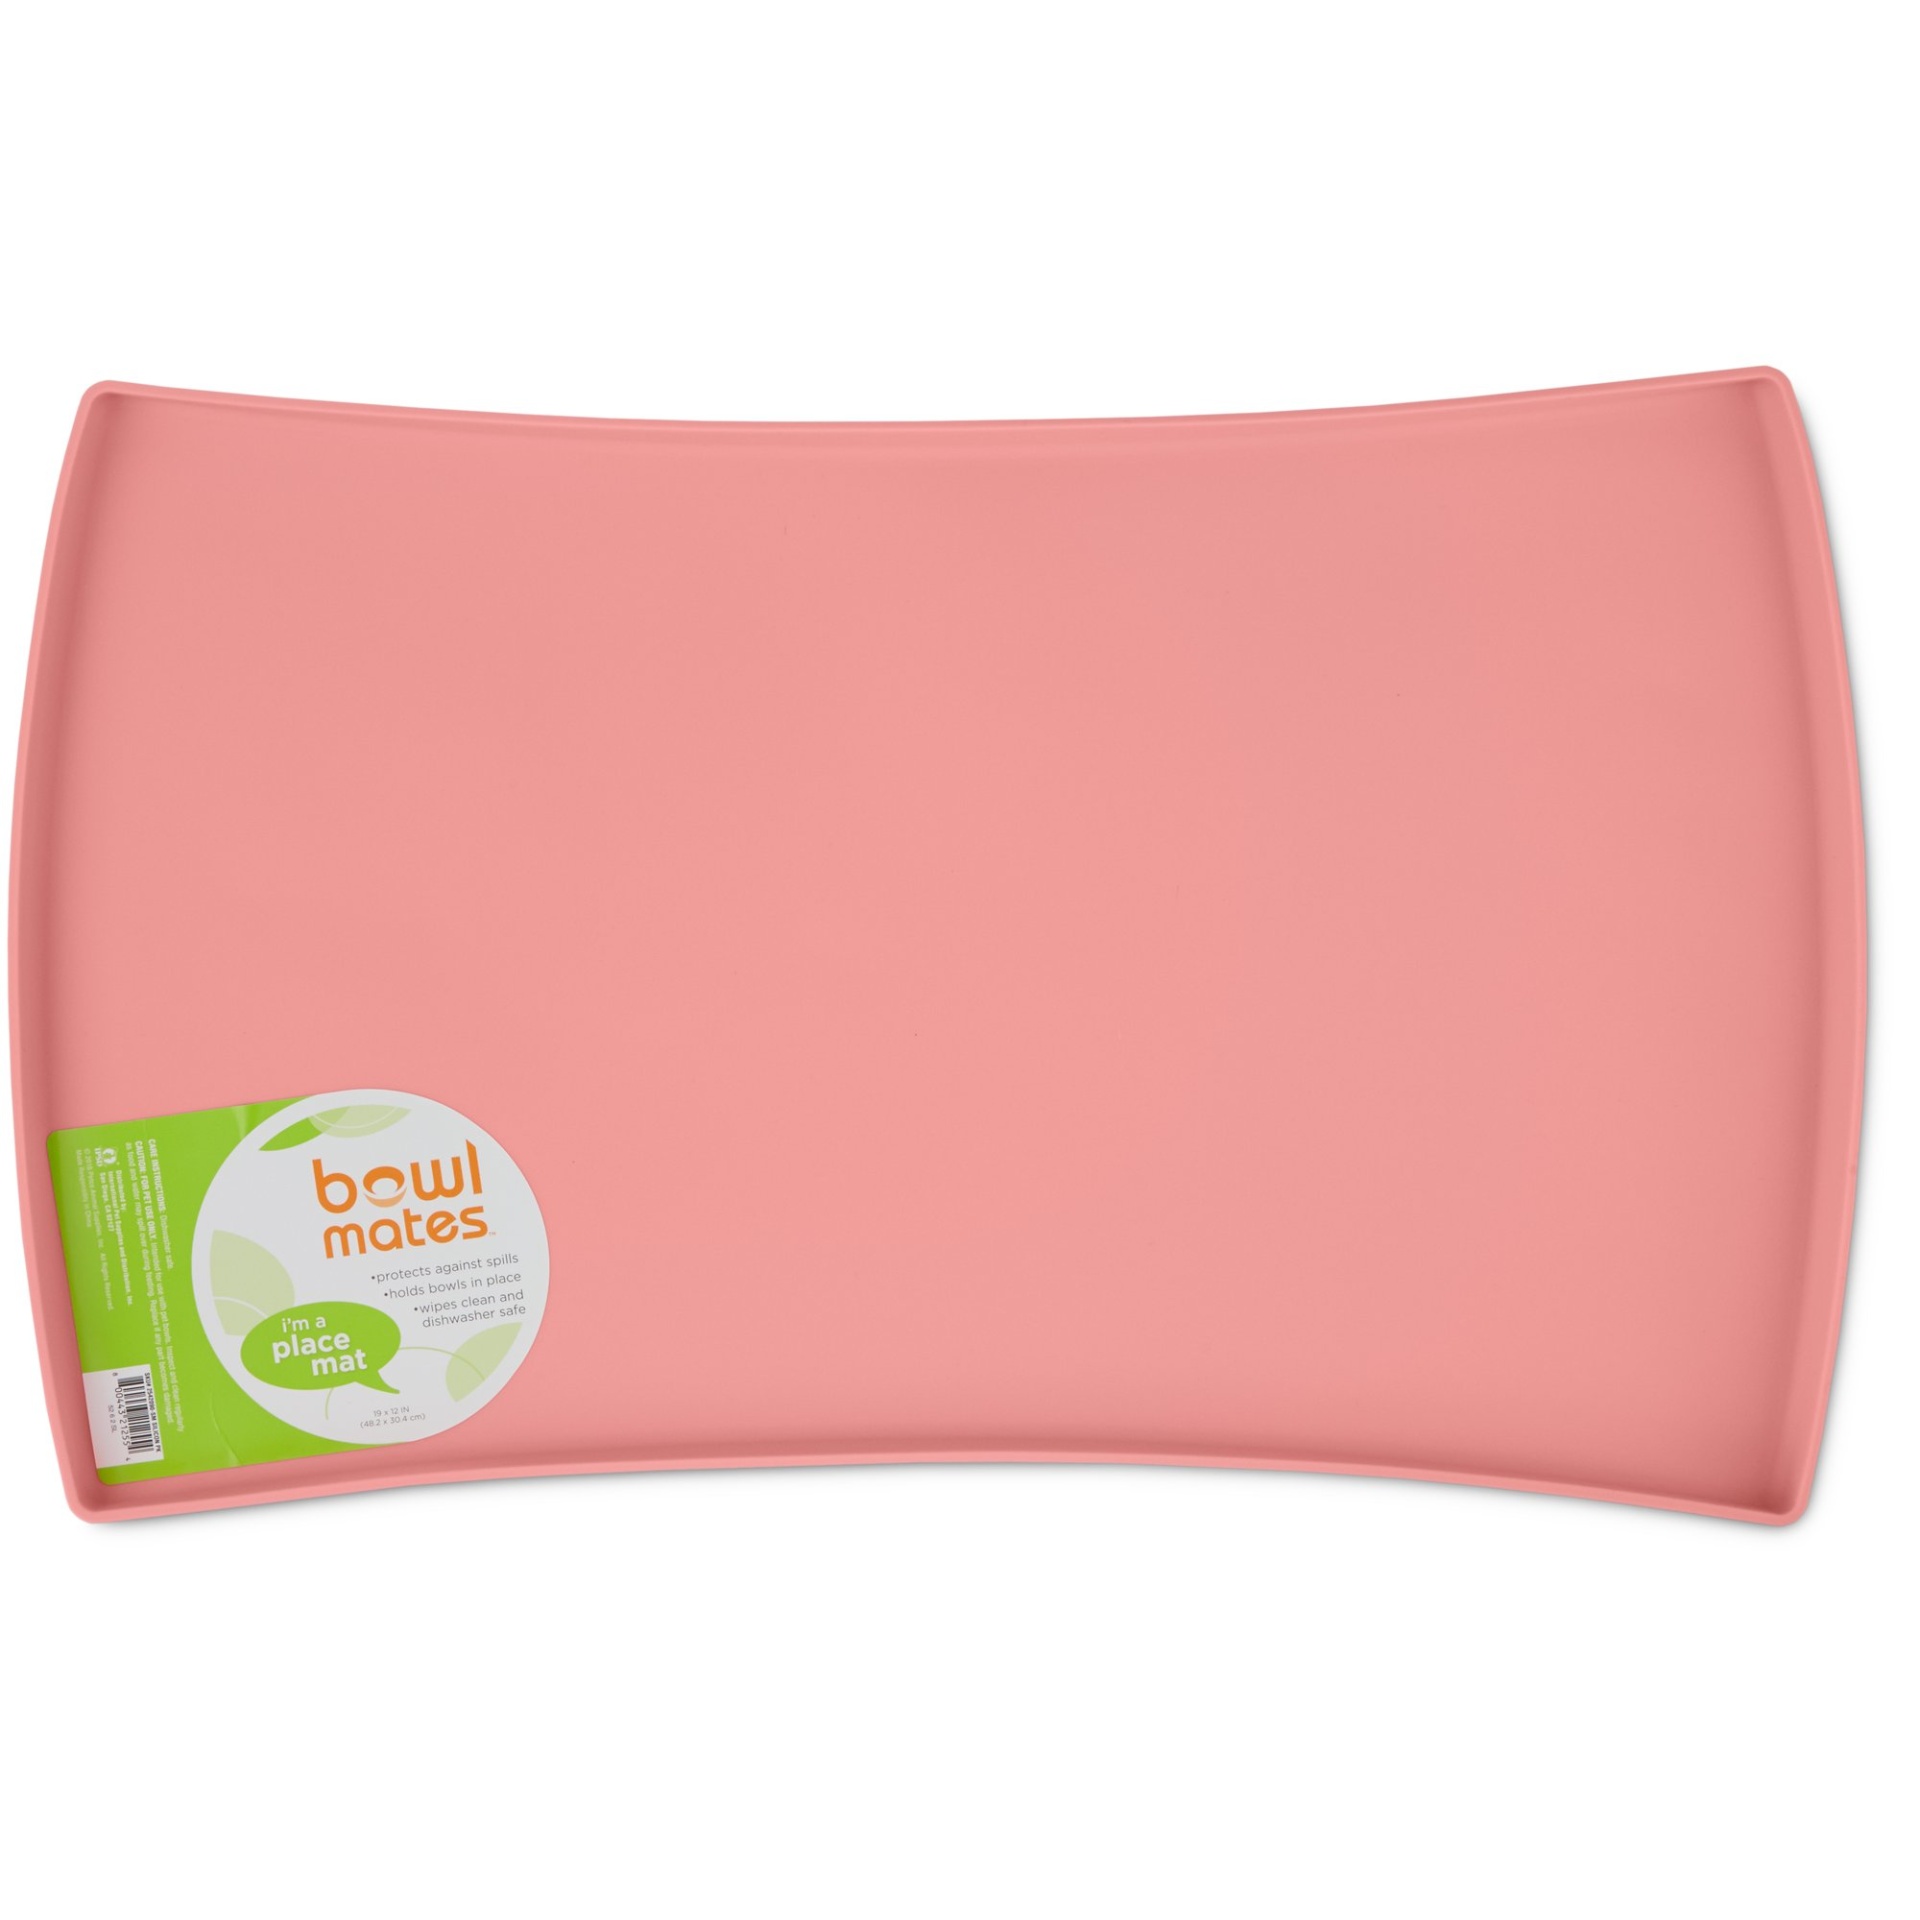 slide 1 of 1, Bowlmates Pink Silicone Placemat, MED